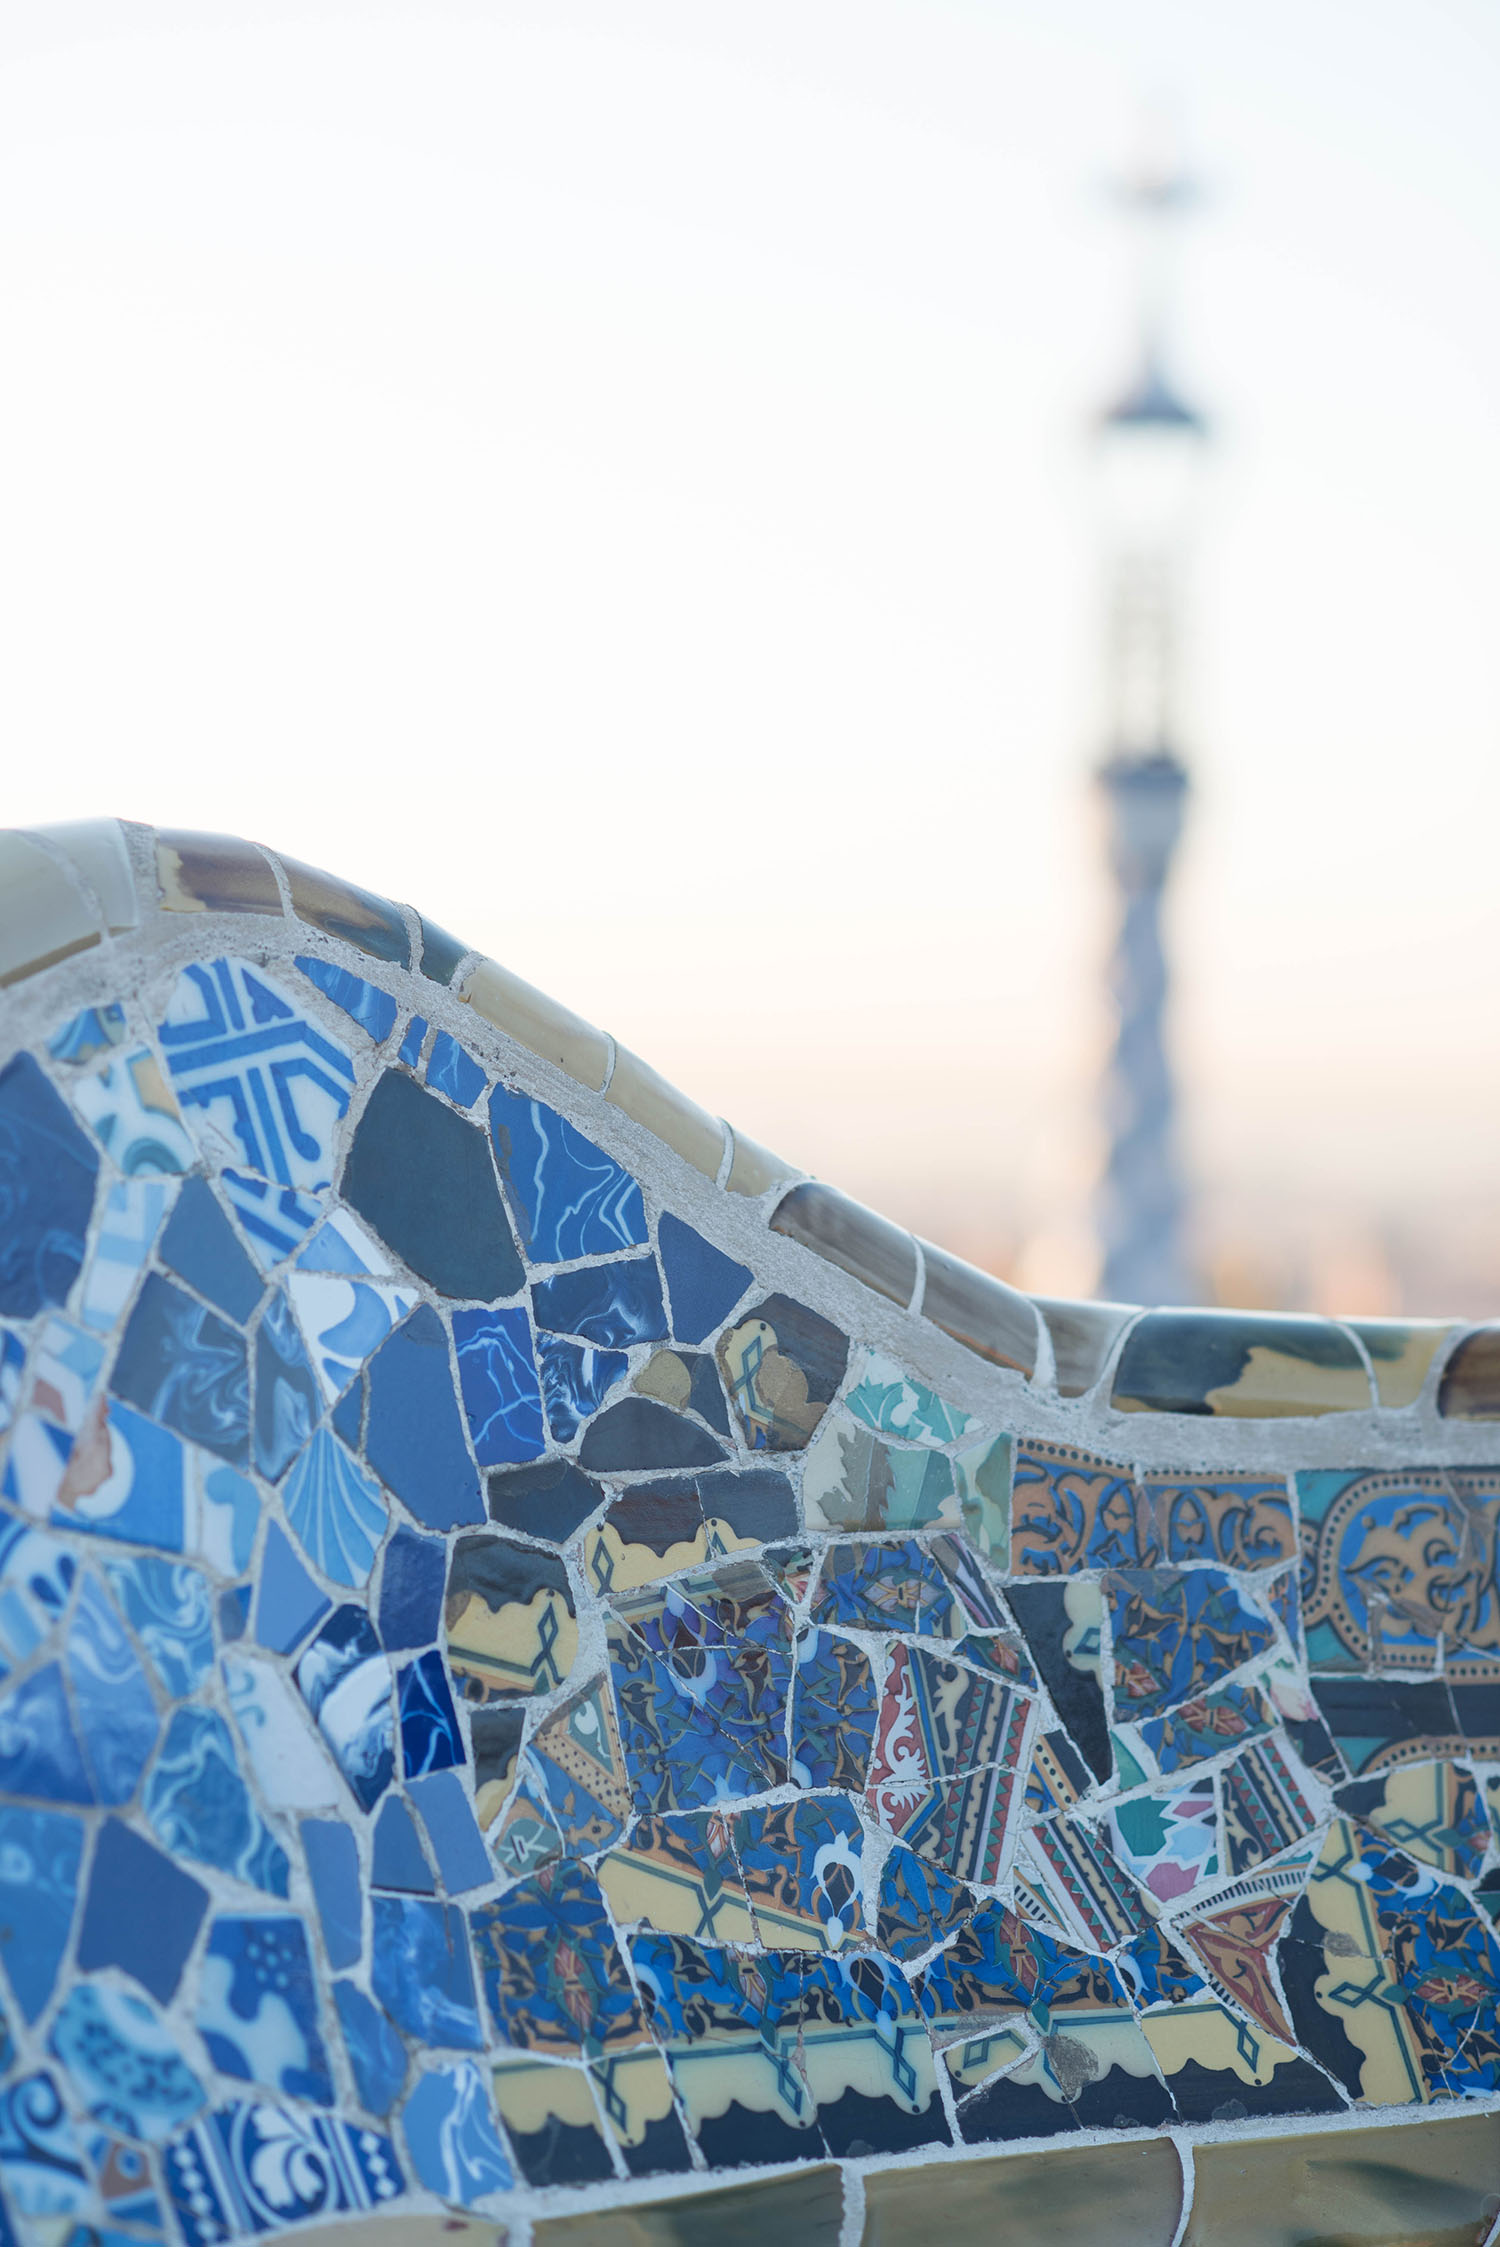 Sunrise over blue mosaic tiles at Antoni Gaudi's Parc Guell in Barcelona, Spain, as photographed by travel blogger Cee Fardoe of Coco & Vera